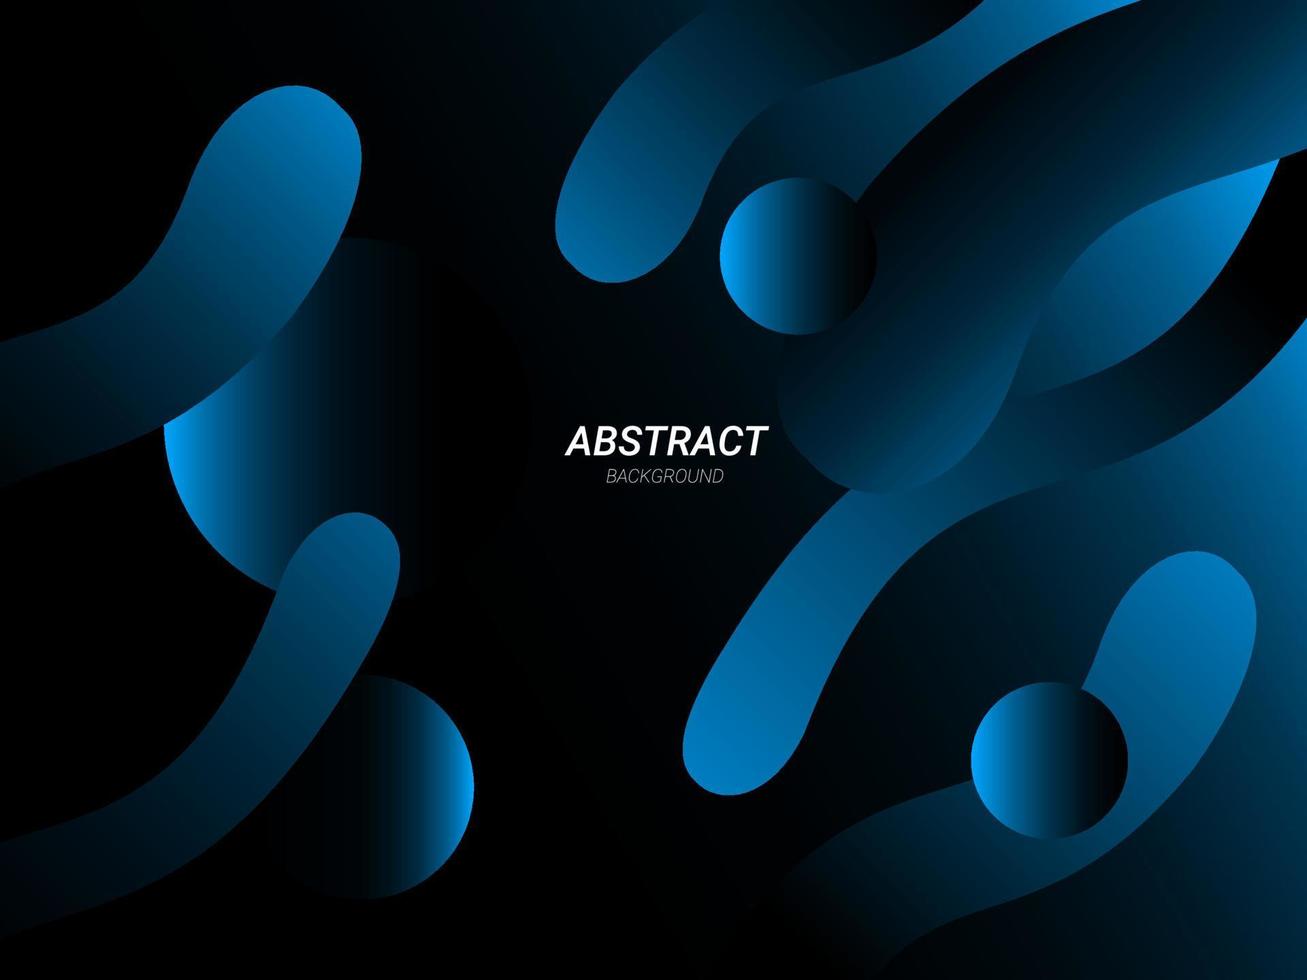 Blue abstract geometric decorative design background vector